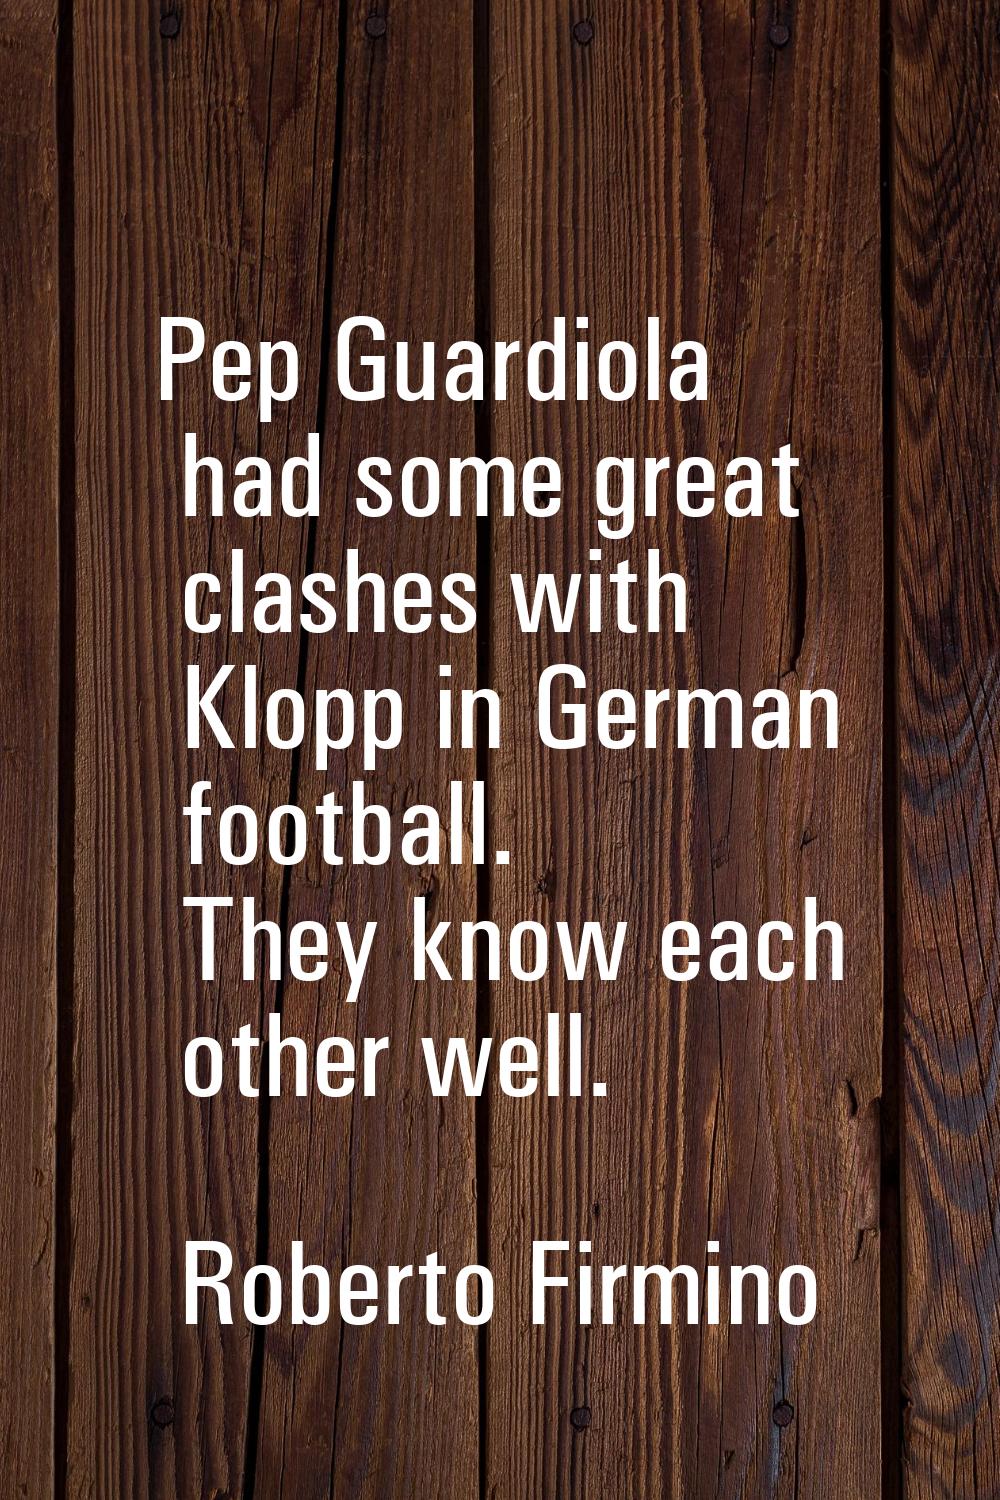 Pep Guardiola had some great clashes with Klopp in German football. They know each other well.